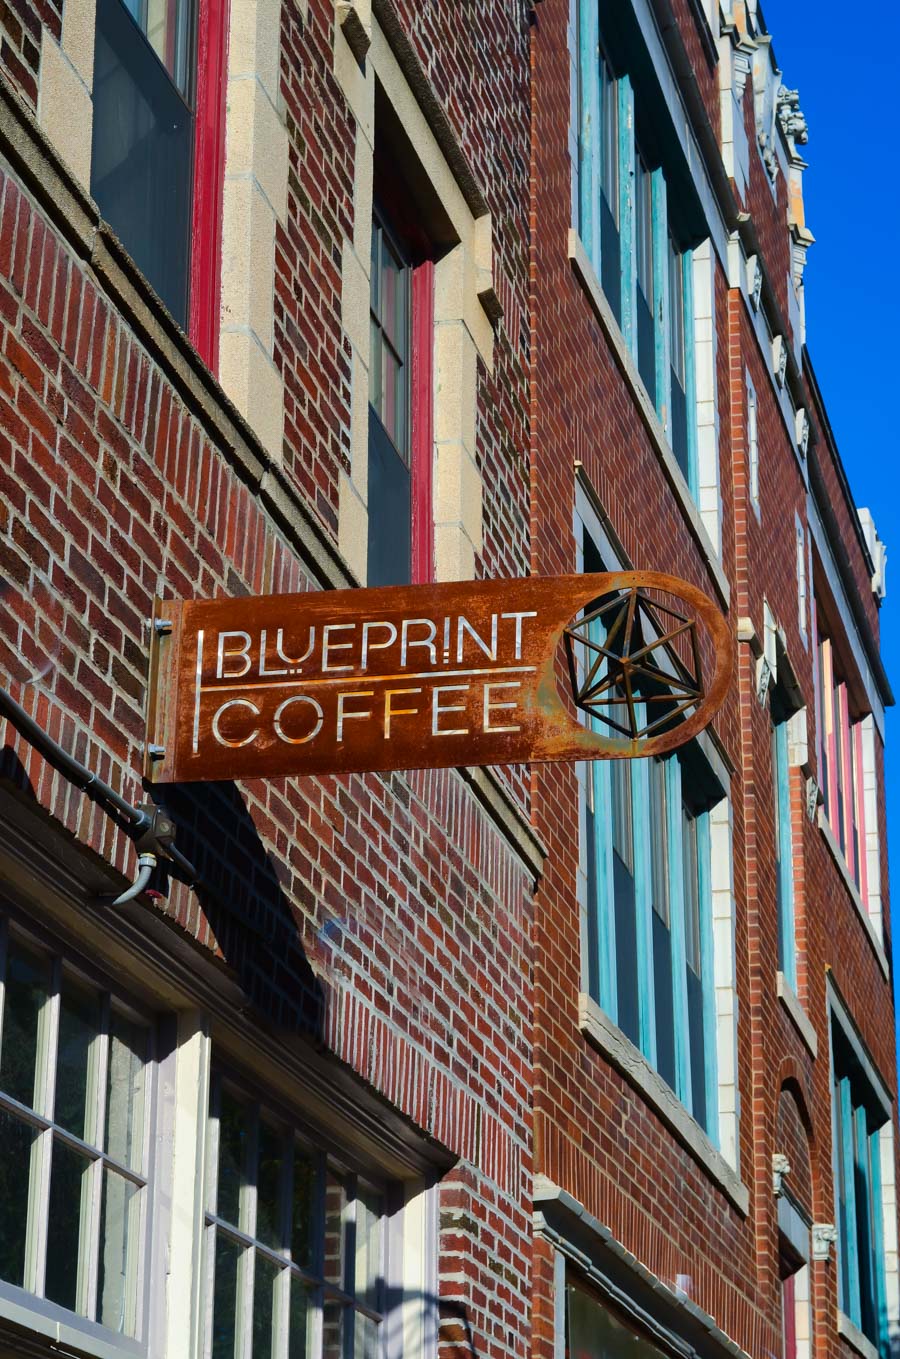 Where to Eat in St. Louis | Restaurant Guide | Blueprint Coffee